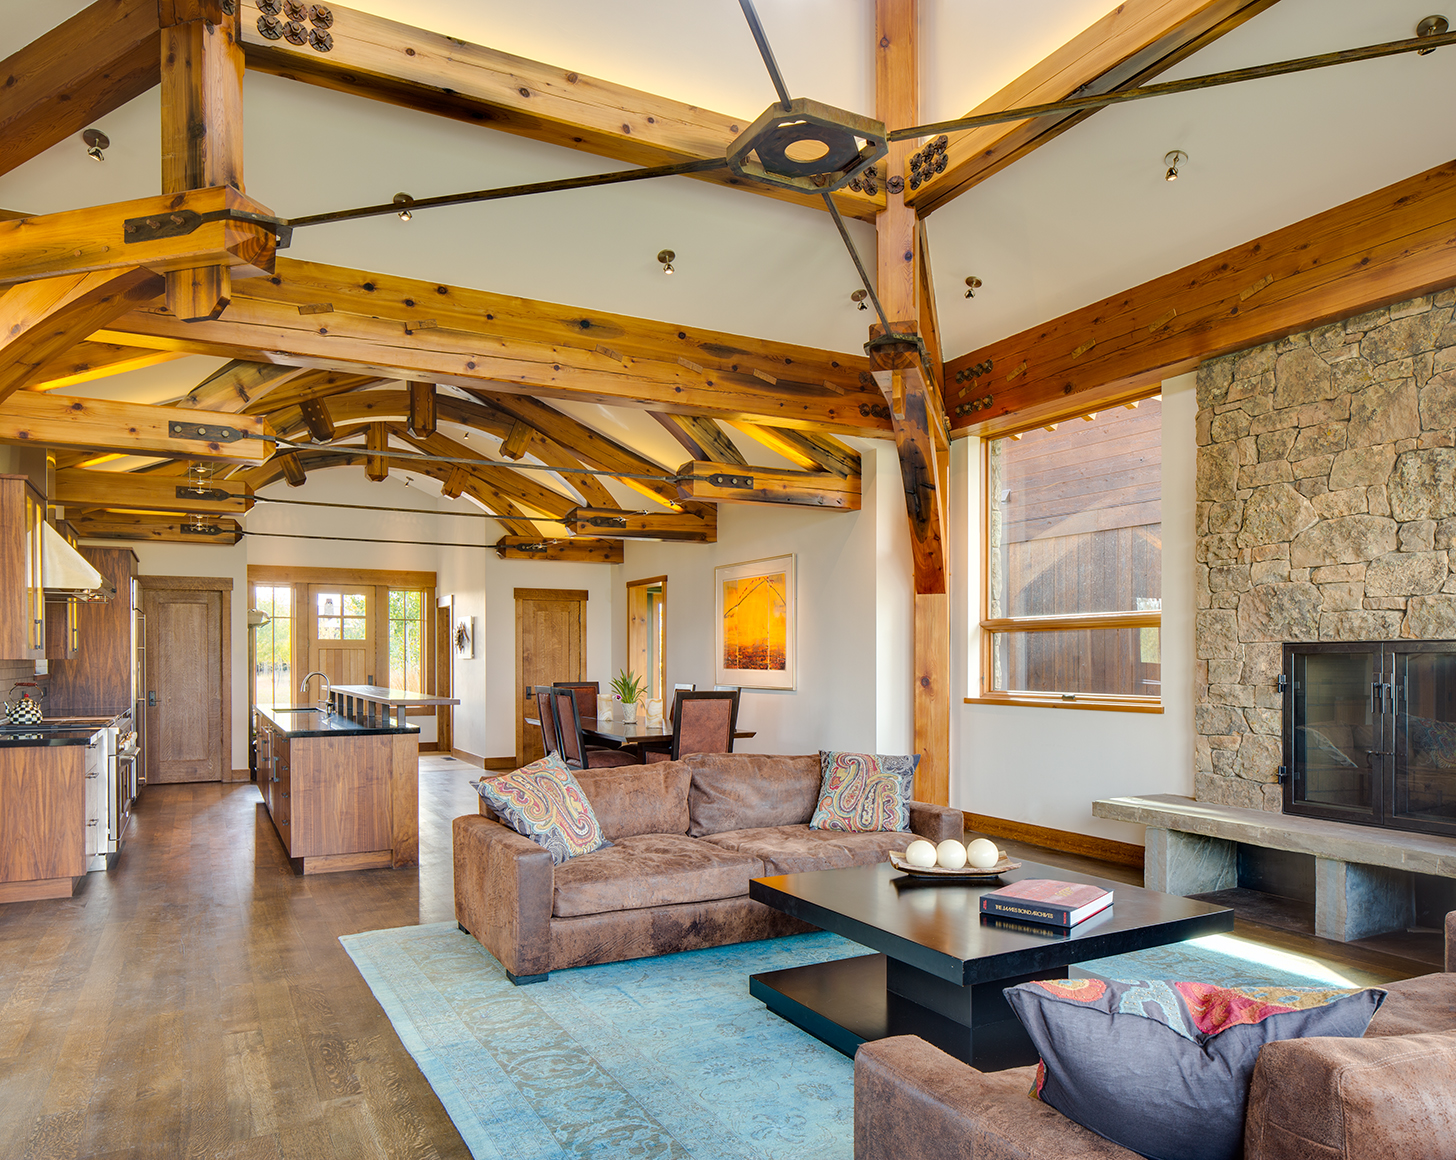 Interior view of main living area with kitchen, living room, fire place and dining room in private residence in Jackson, WY. The architectural high light is the exposed truss work of reclaimed timber.